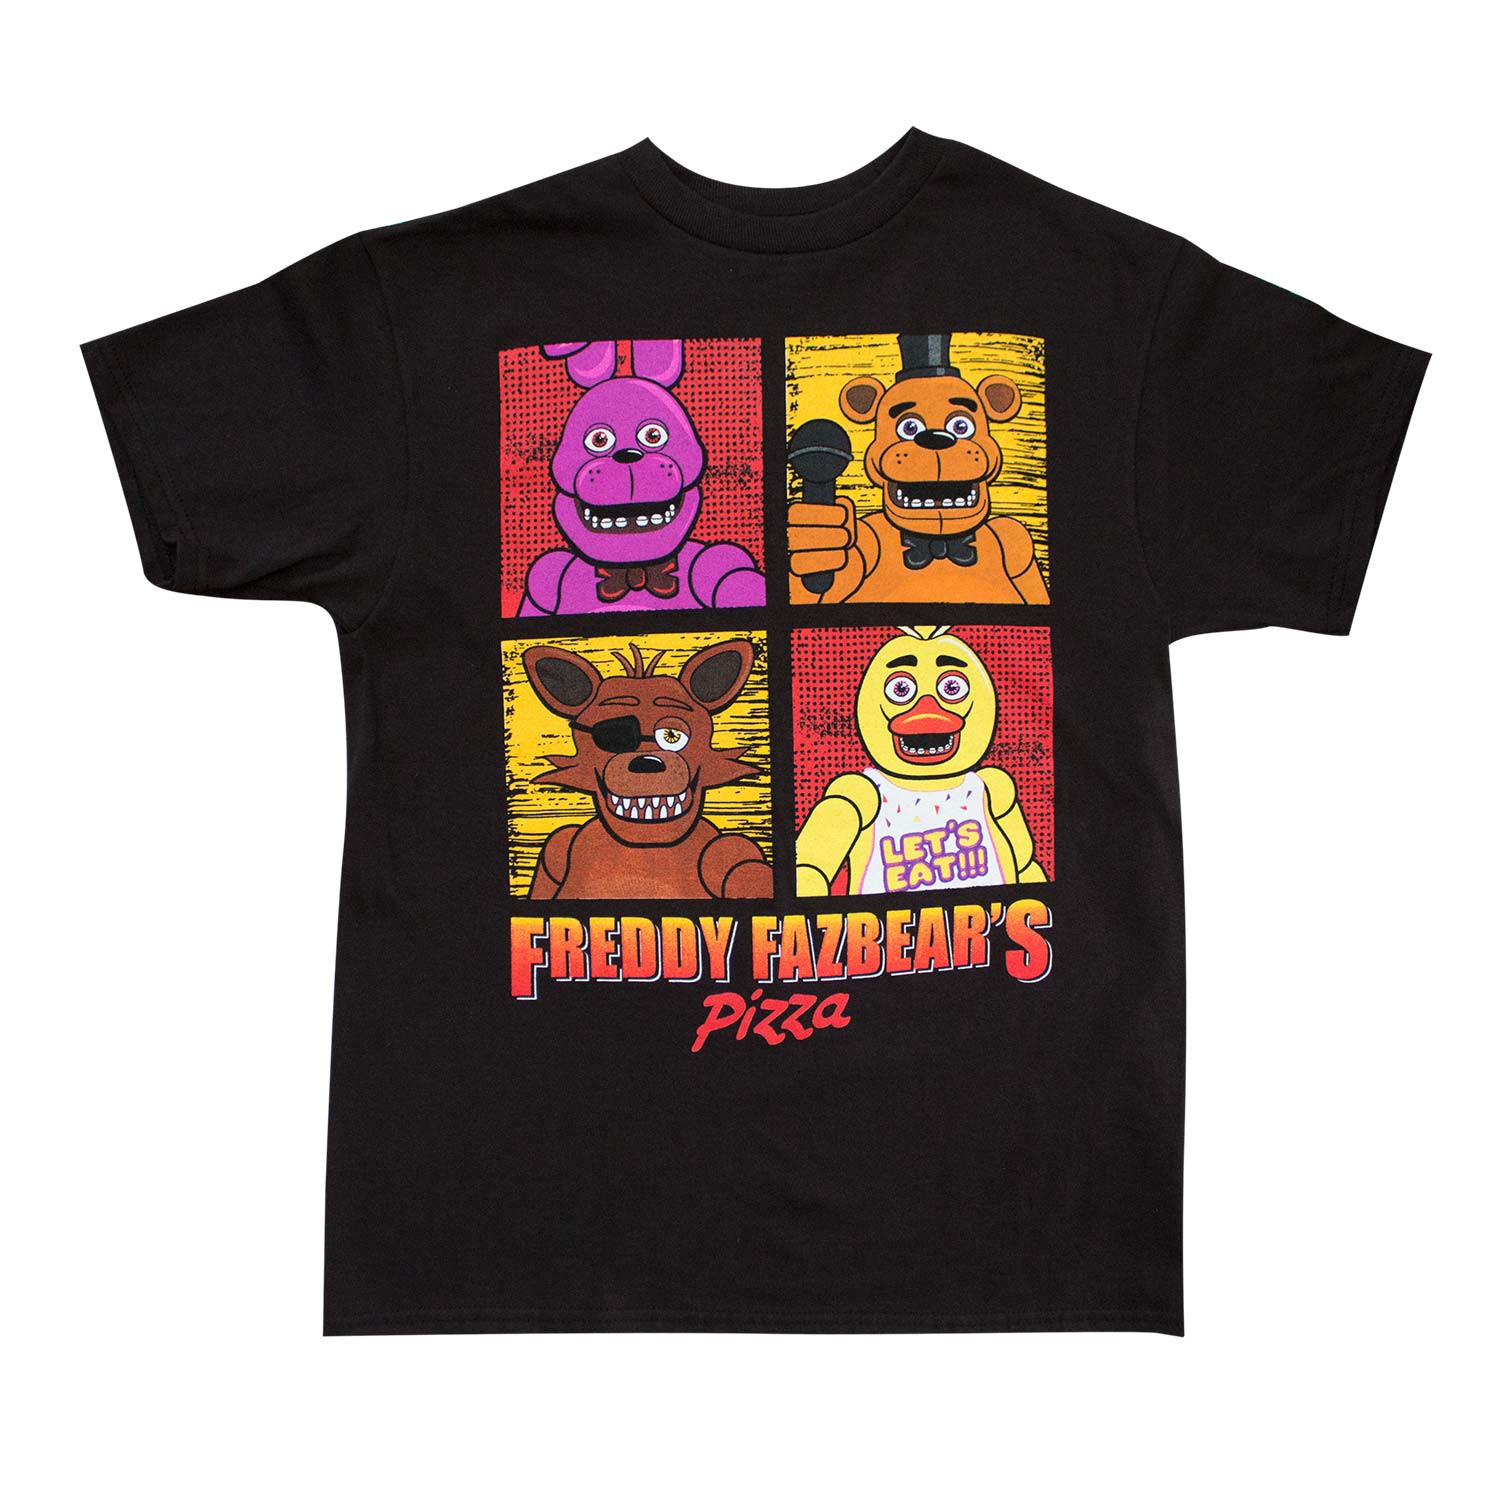 Five Nights At Freddy's Youth Pizza Tee Shirt